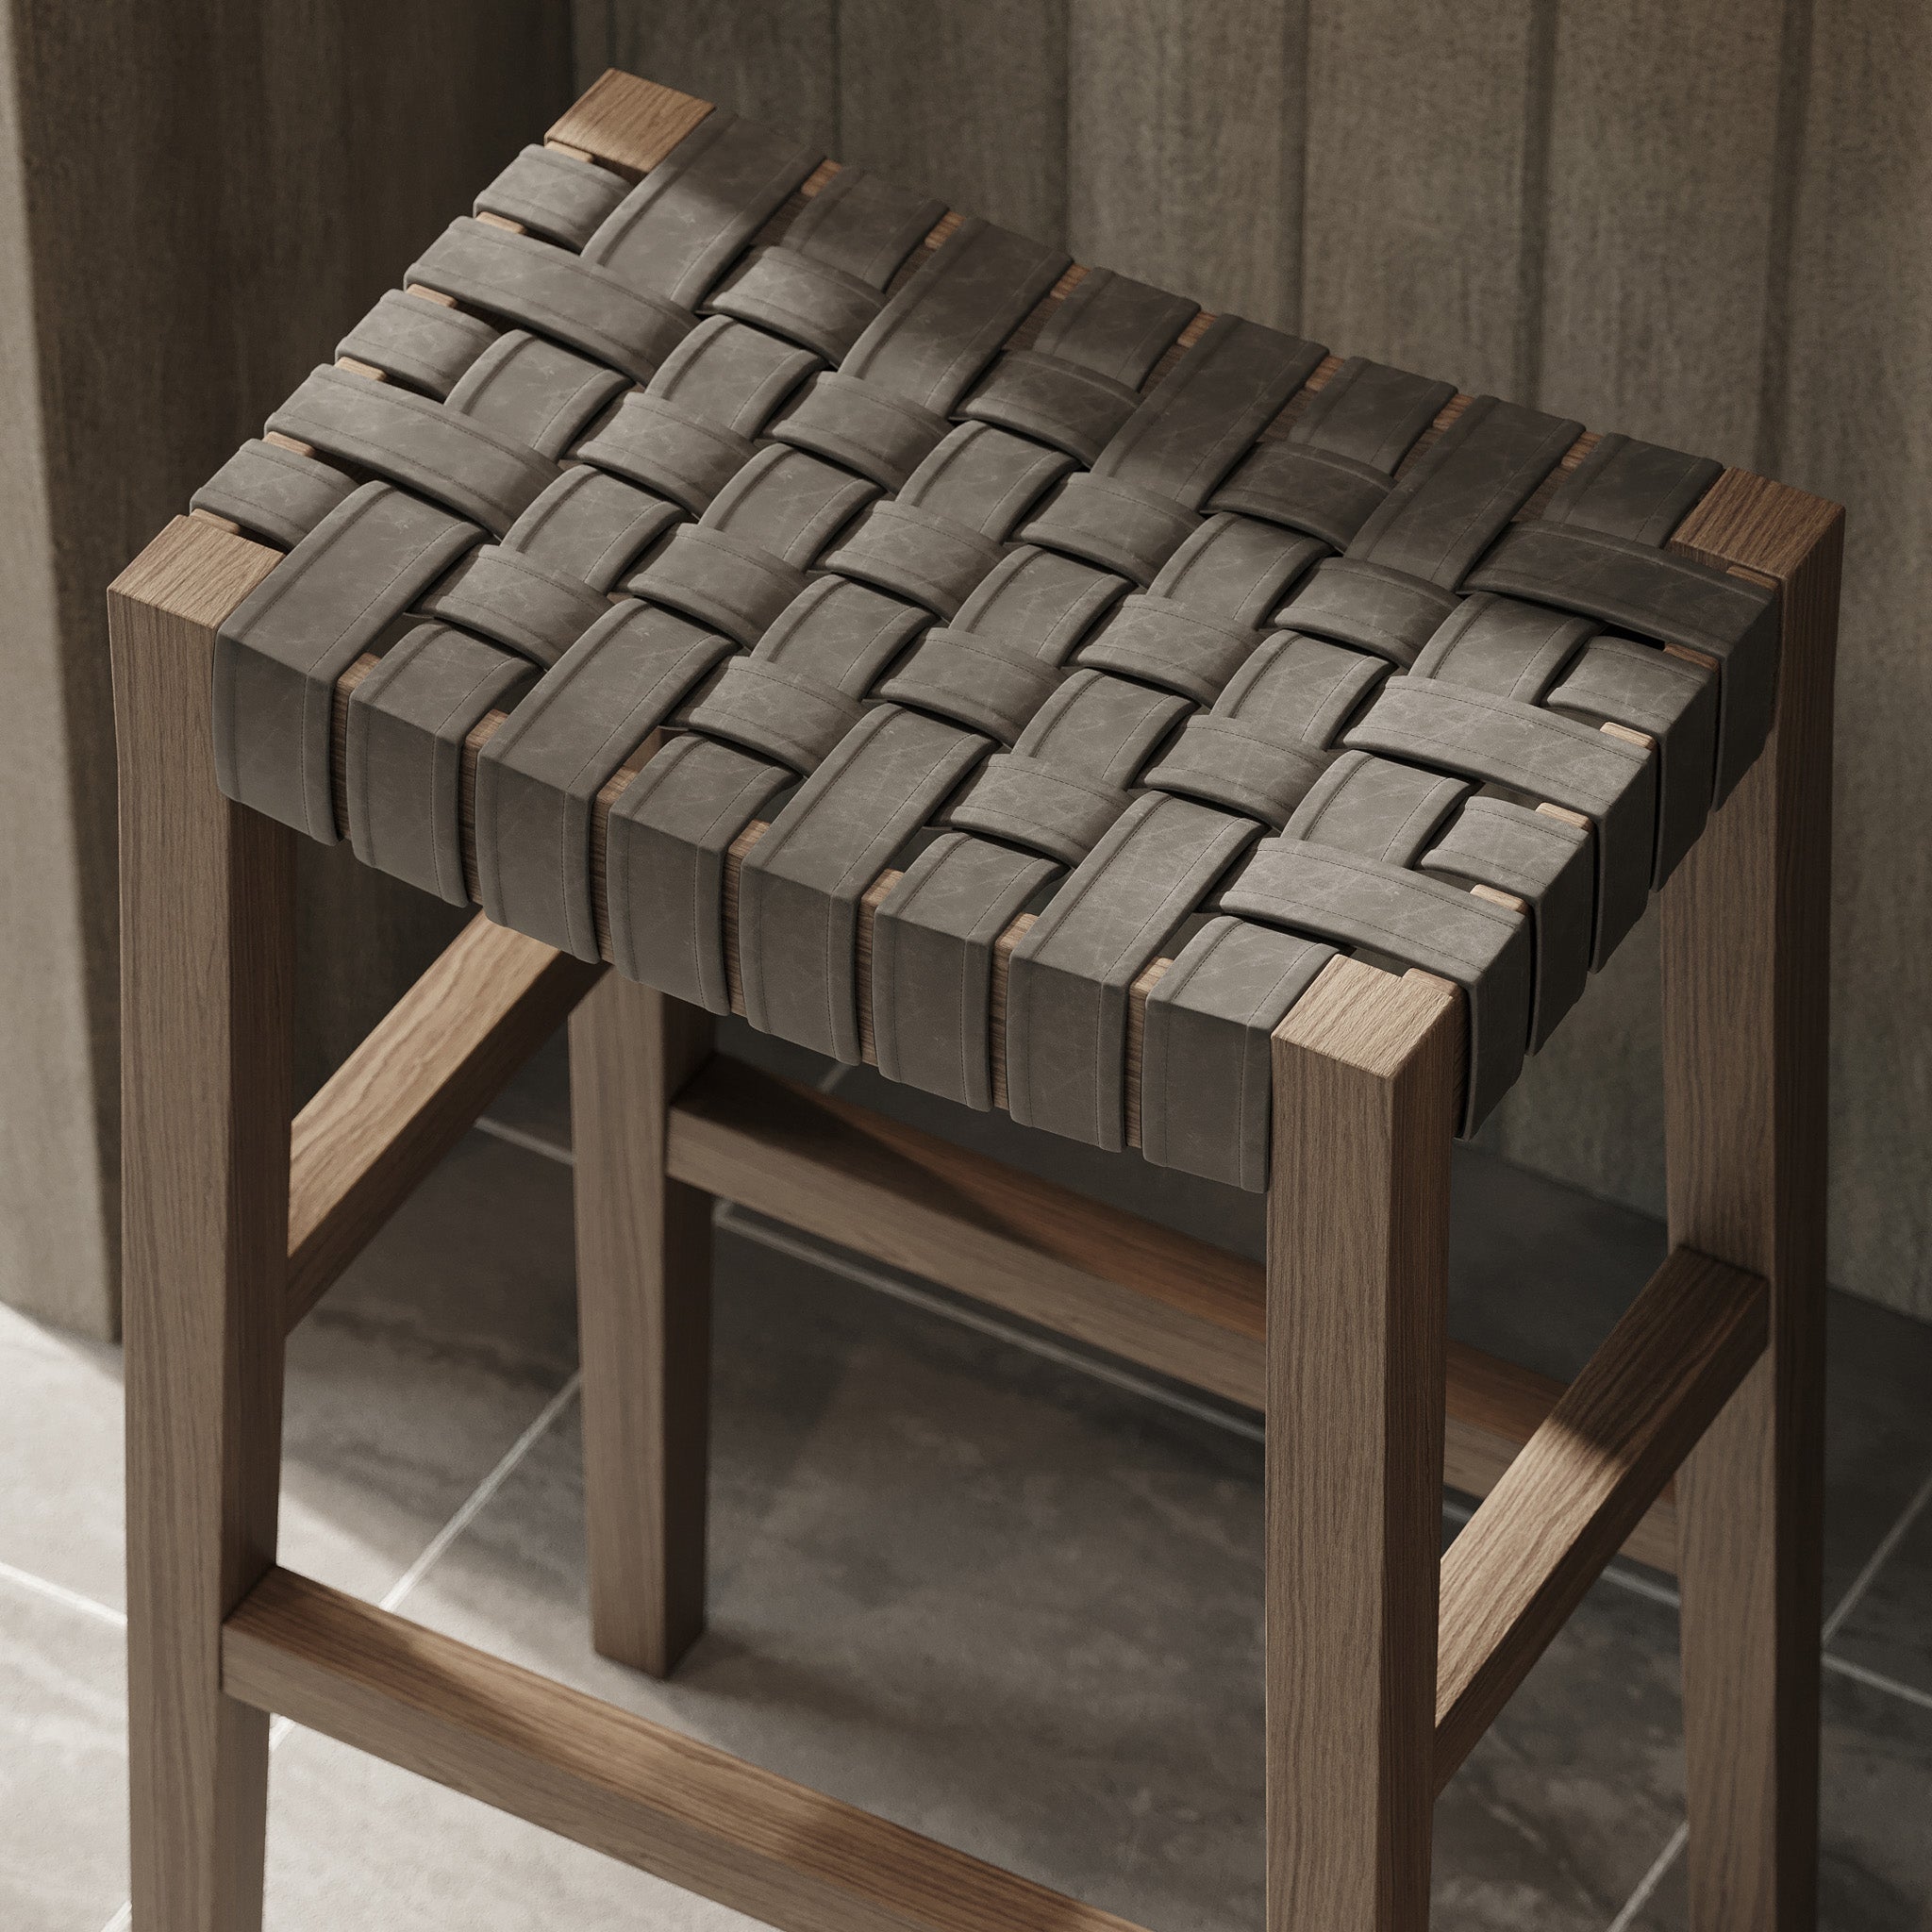 Emerson Bar Stool in Weathered Grey Wood Finish with Ronan Stone Vegan Leather in Stools by Maven Lane